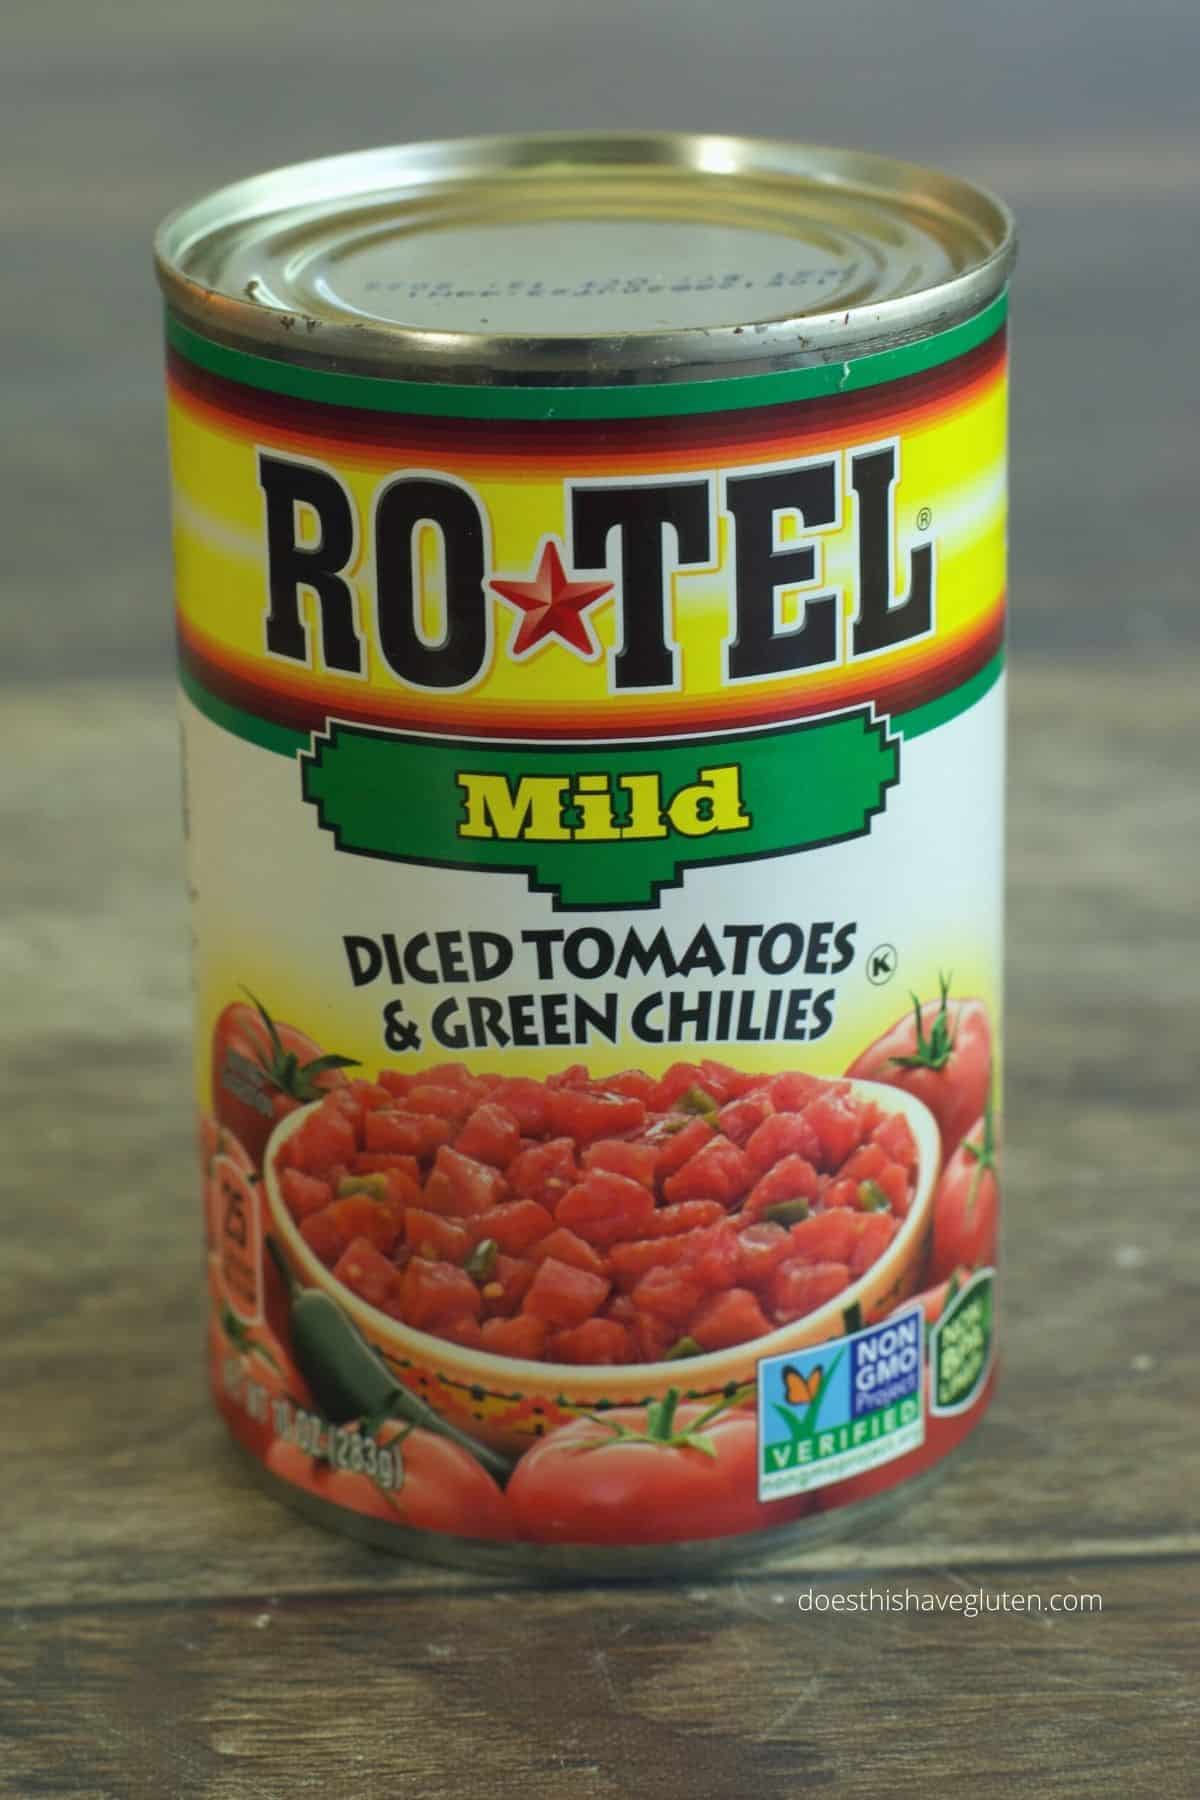 A can of Rotel on the counter.